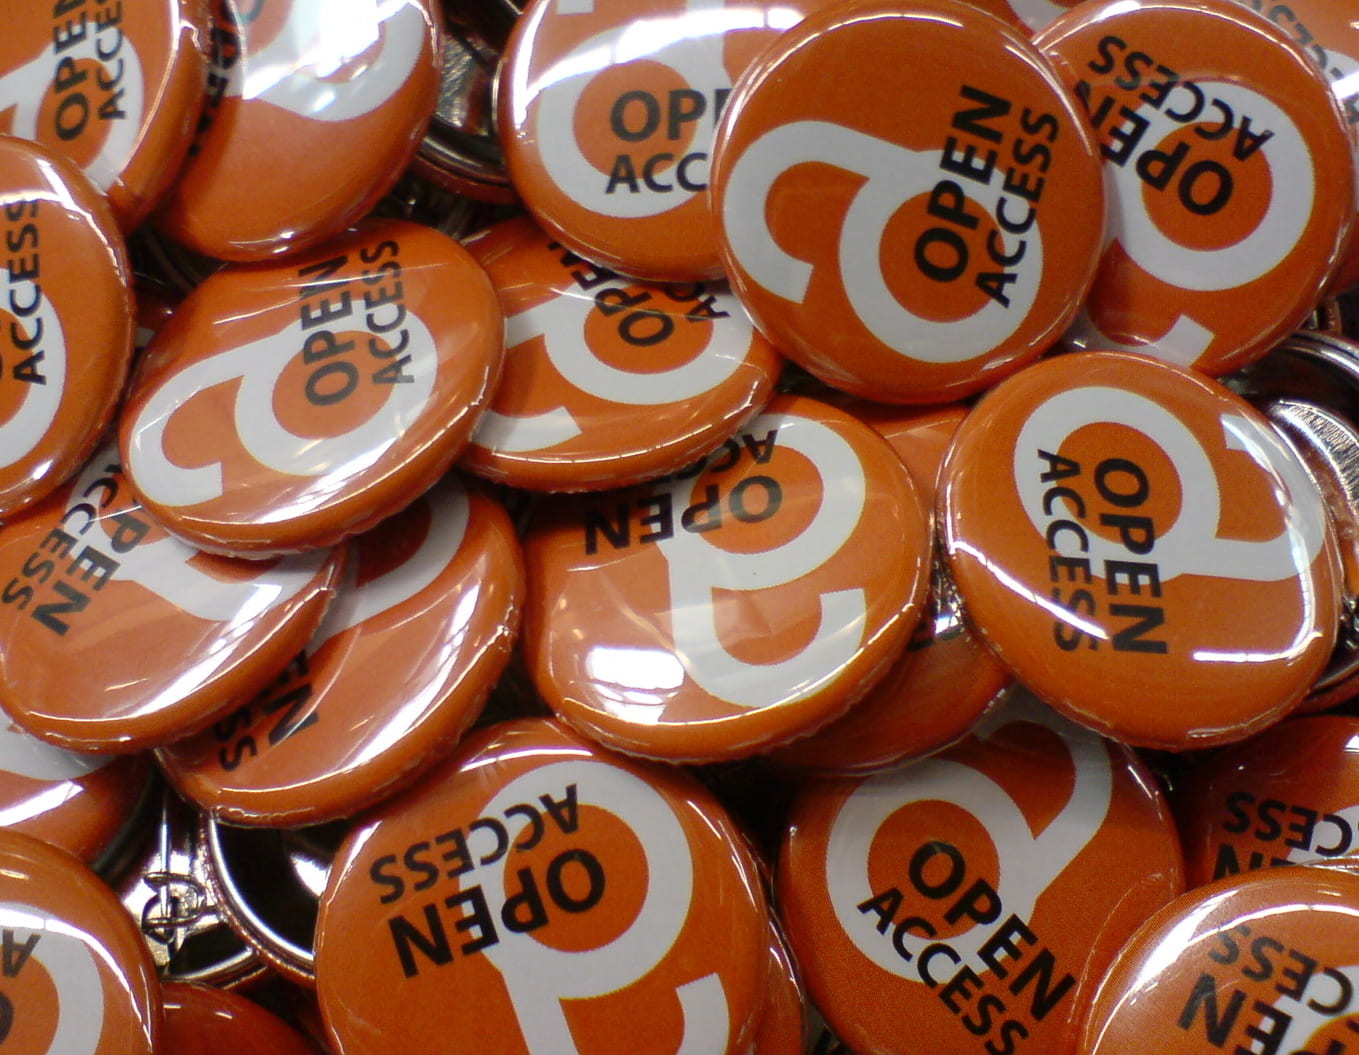 Image of orange Open Access buttons.